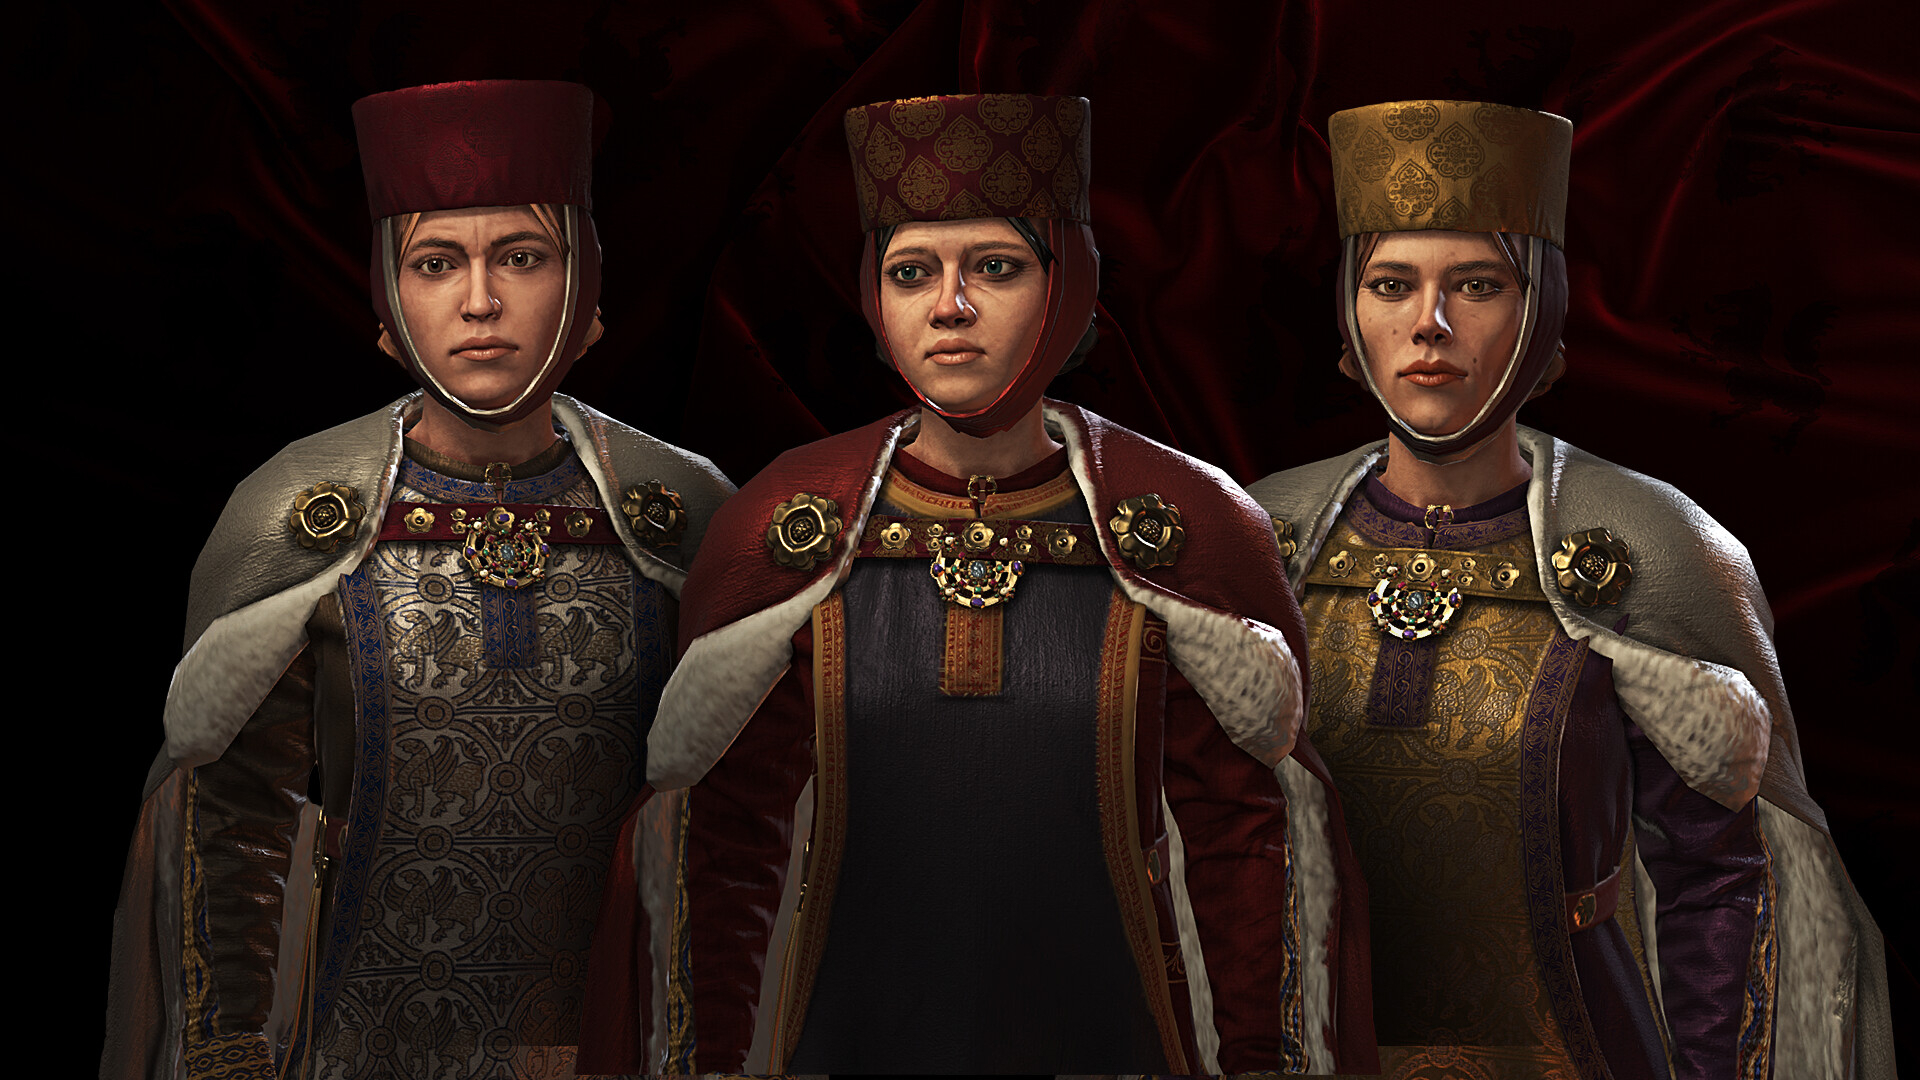 Two New Expansions Are Coming To Crusader Kings 3 With A Bonus Cosmetic Pack If You Buy The 5769